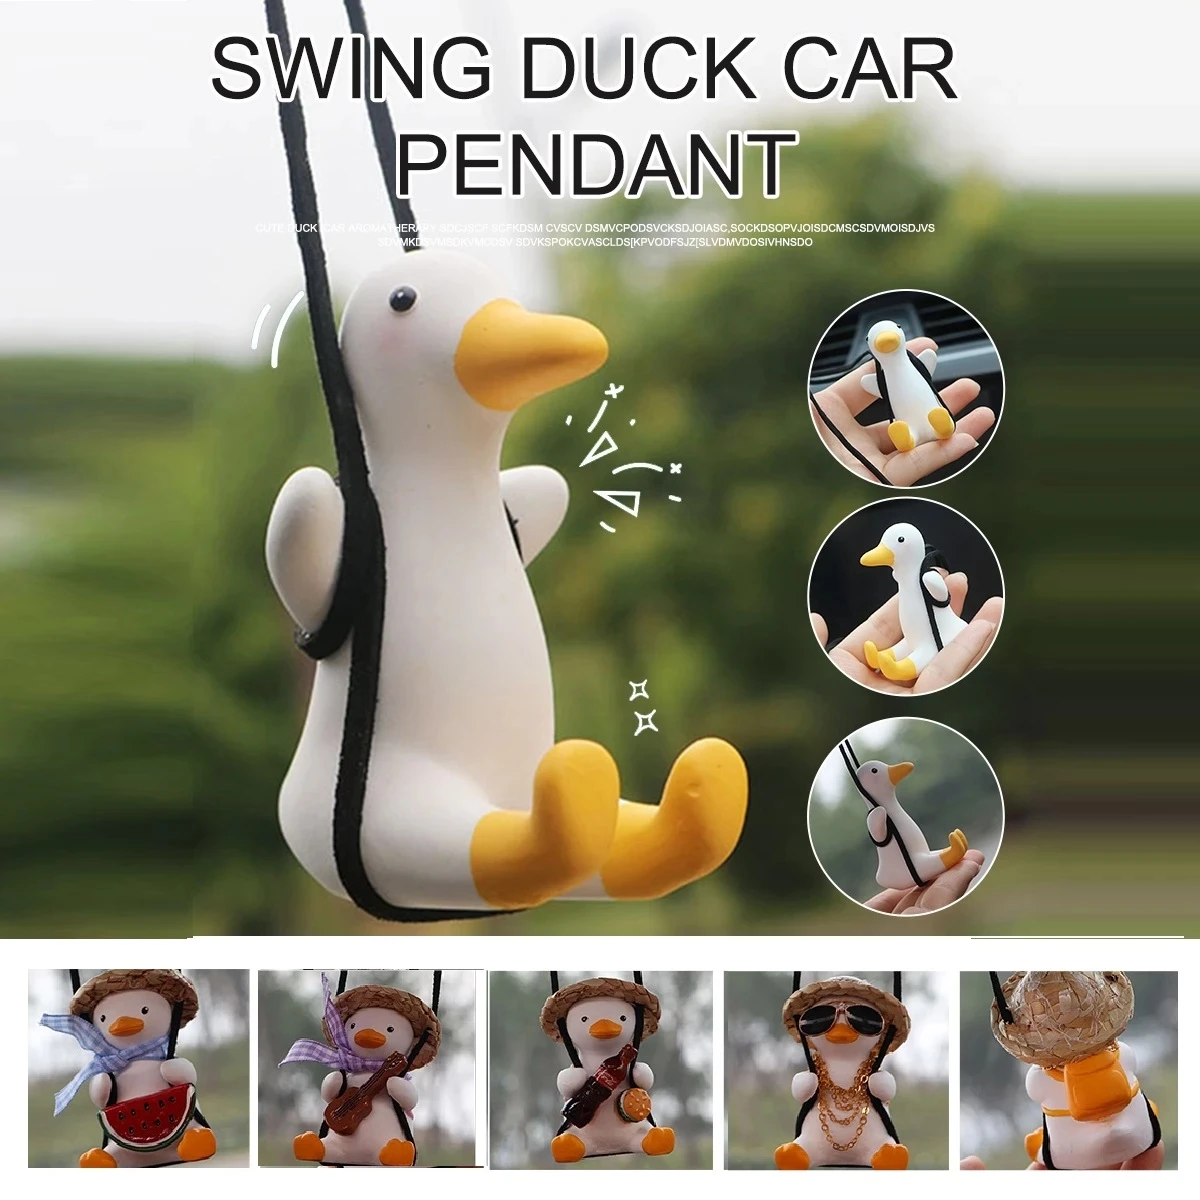 

Cute Swinging Duck Rearview Mirror Pendant Hanging Ornament Swing Ducks Animal Car Charm interior Accessories for Women Girls